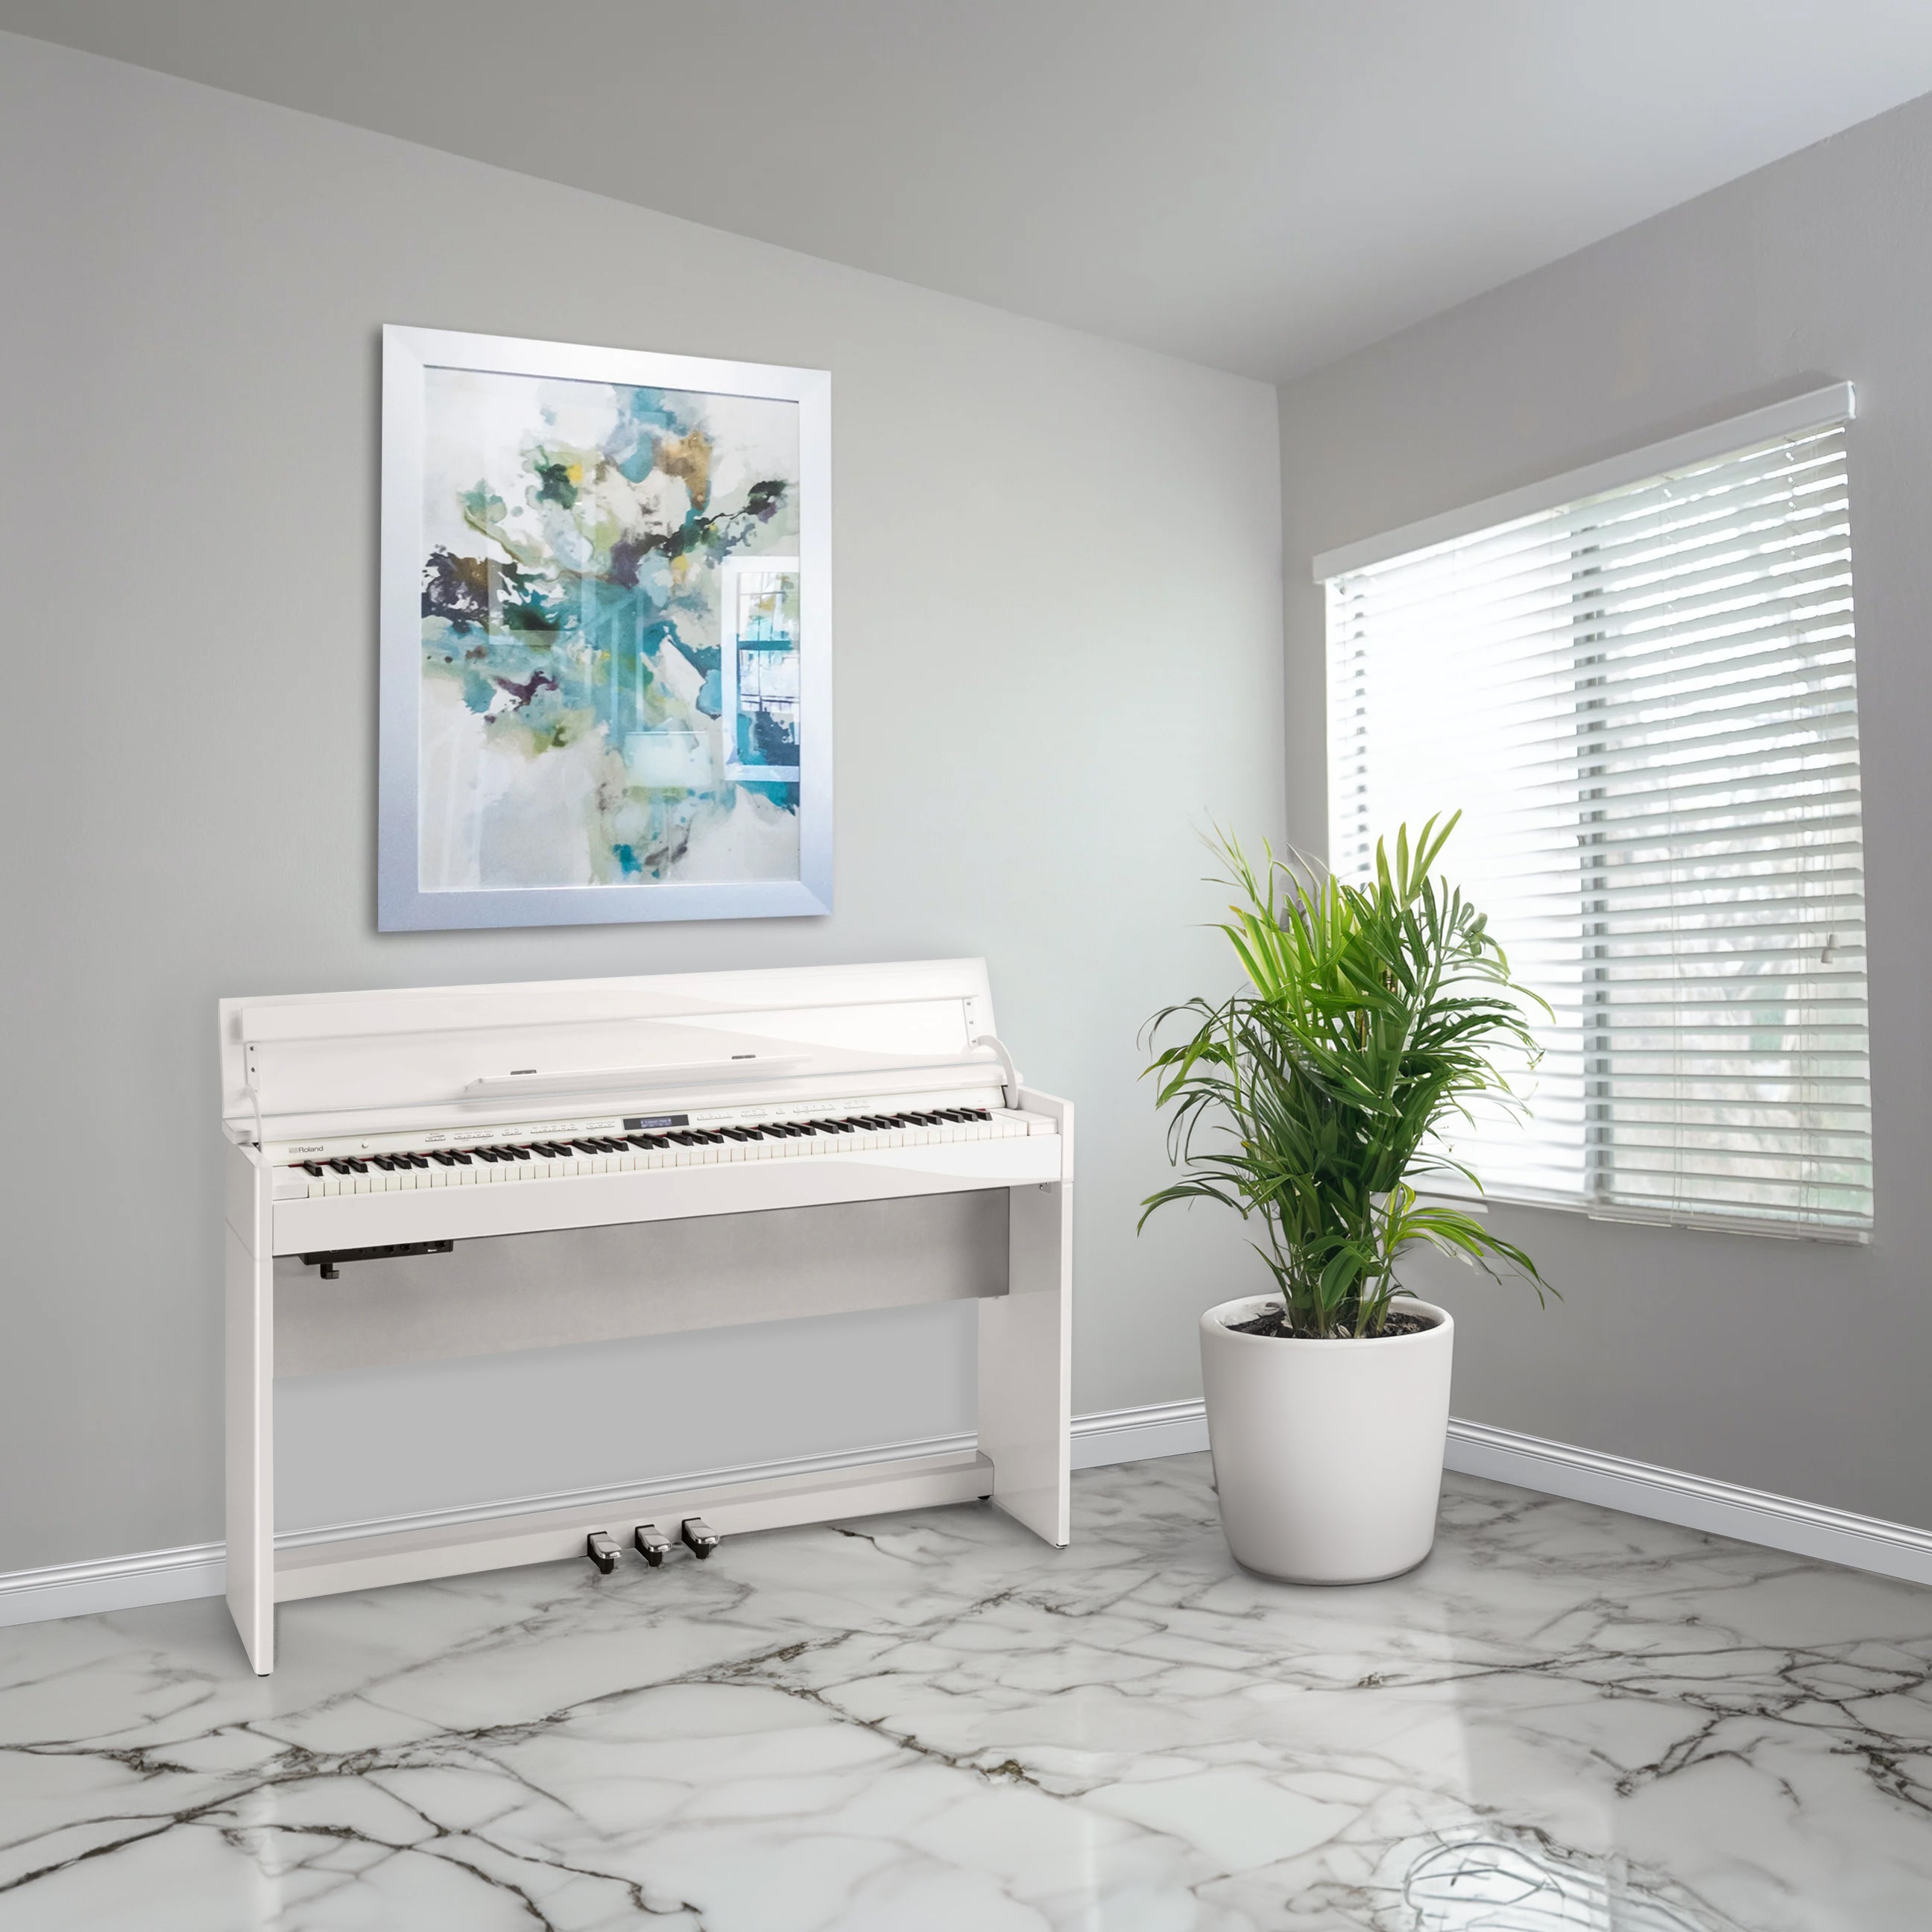 Roland DP603 Digital Piano - Polished White - in a stylish room